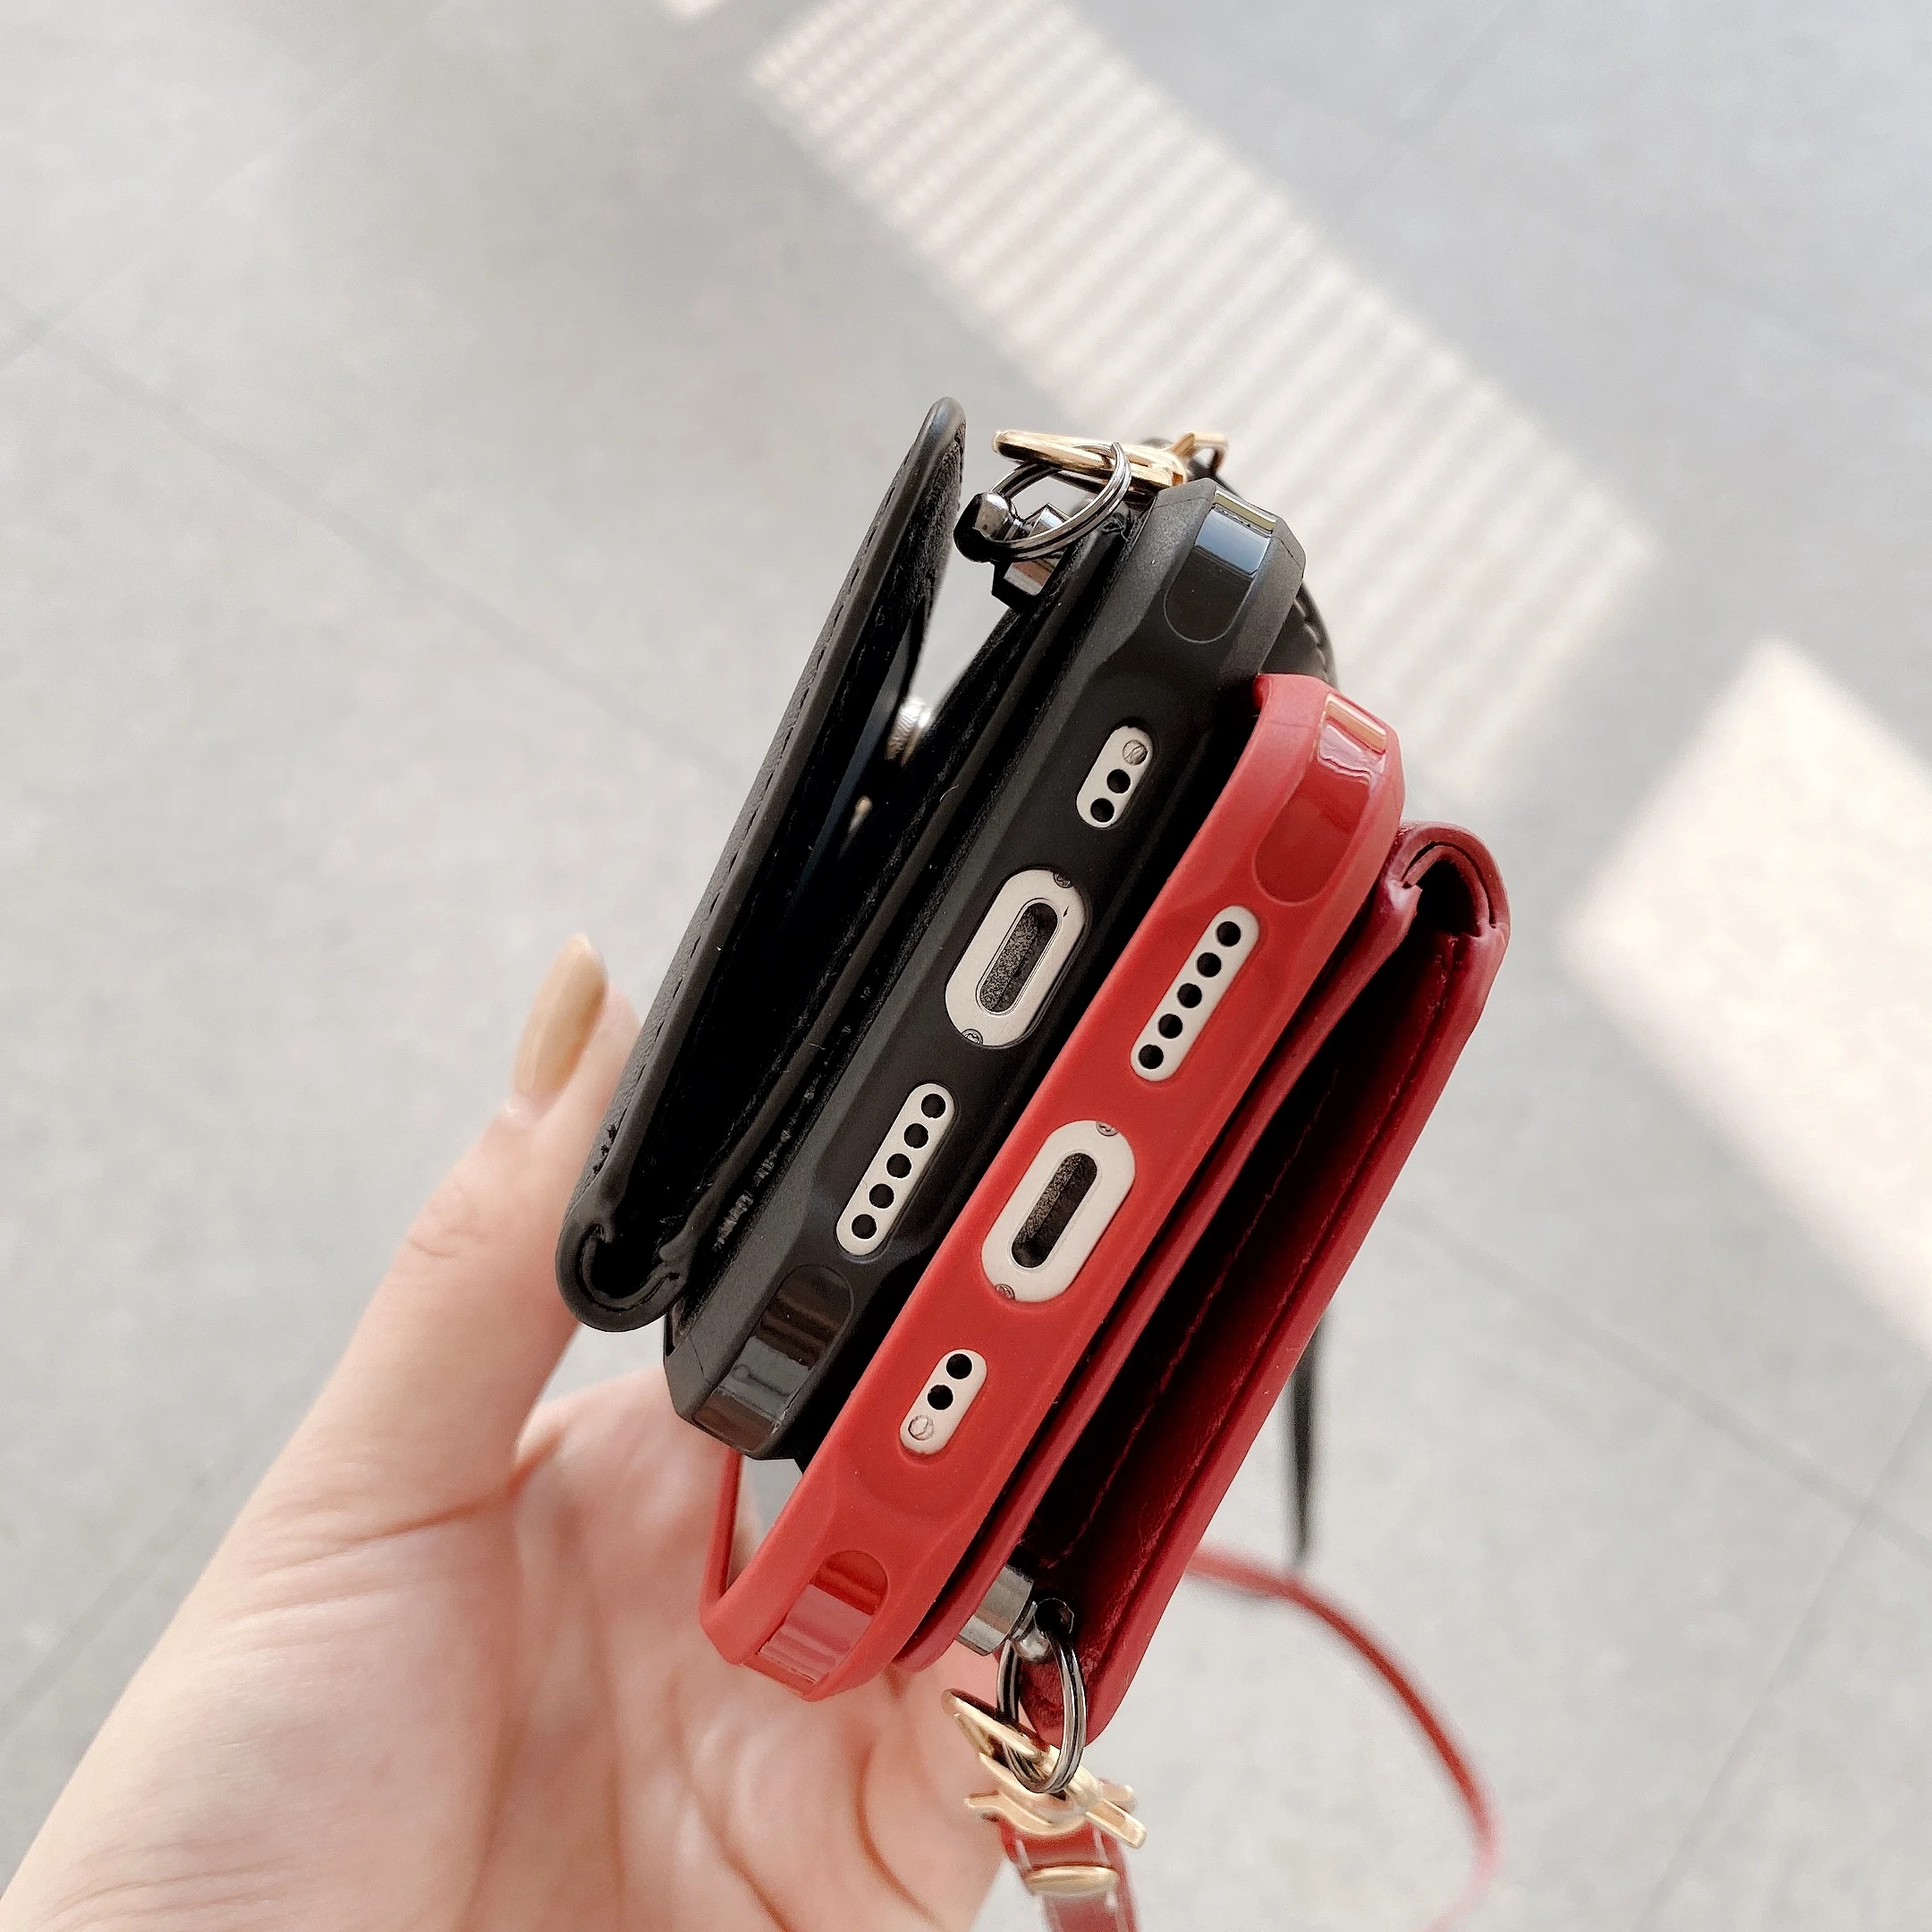 Fashion simple card wallet Crossbody chain bag strap leather case for iPhone 12 11 Pro max case 7 8 plus XS MAX 12mini X XR CAPA iphone 8 plus phone case